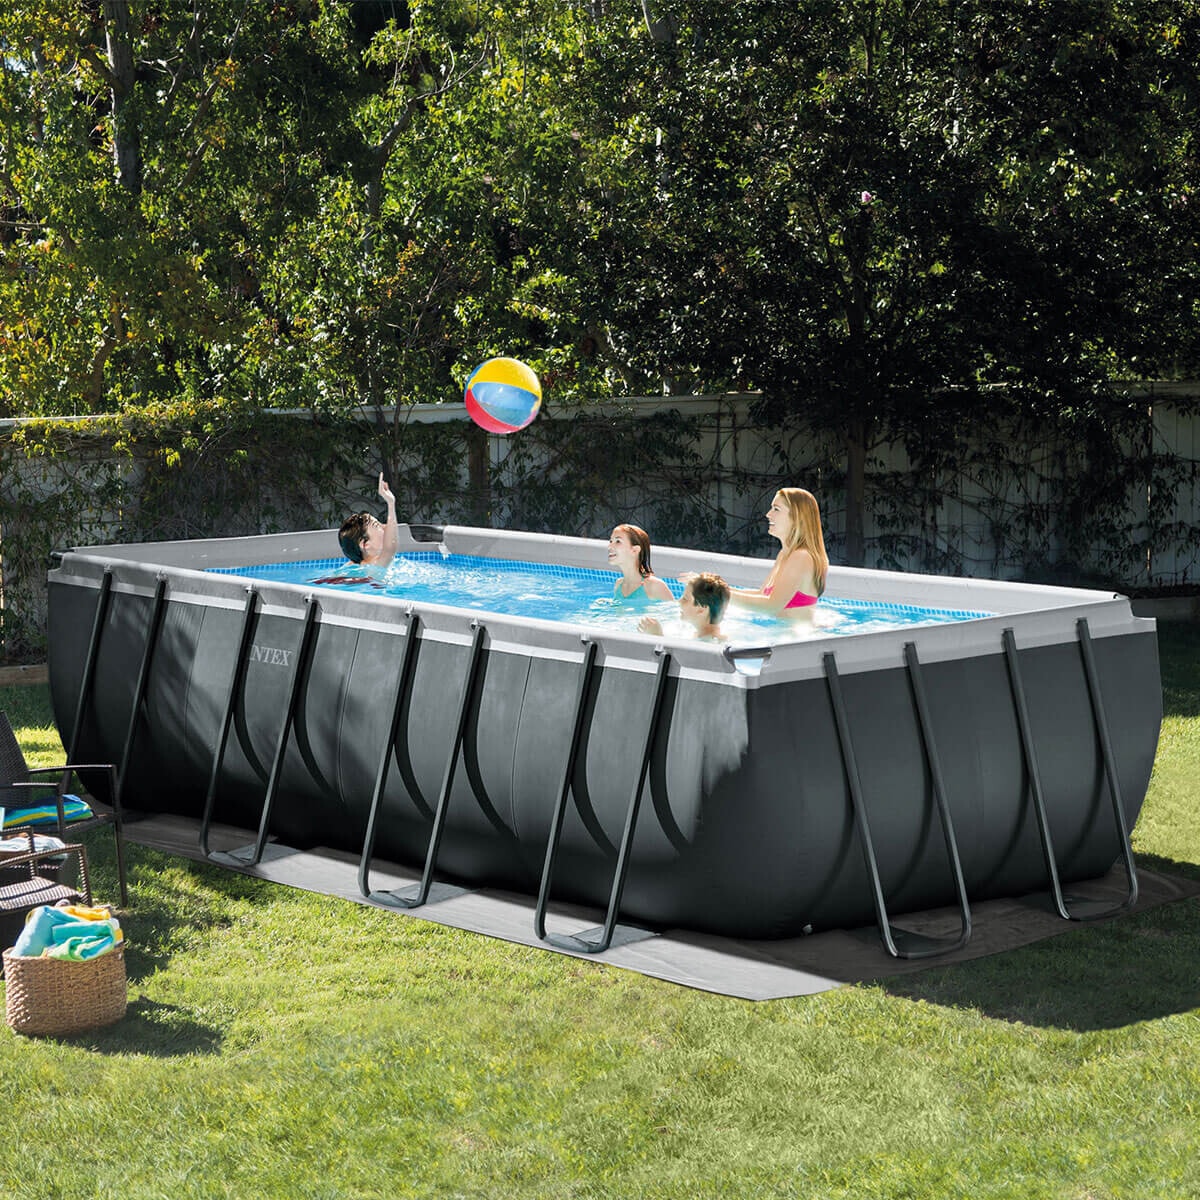 Above ground metal framepool Ultra Silver Hespéride | The INTEX Ultra Pool Kit you to build your own large pool yourself. A large swimming pool This pool is large enough to